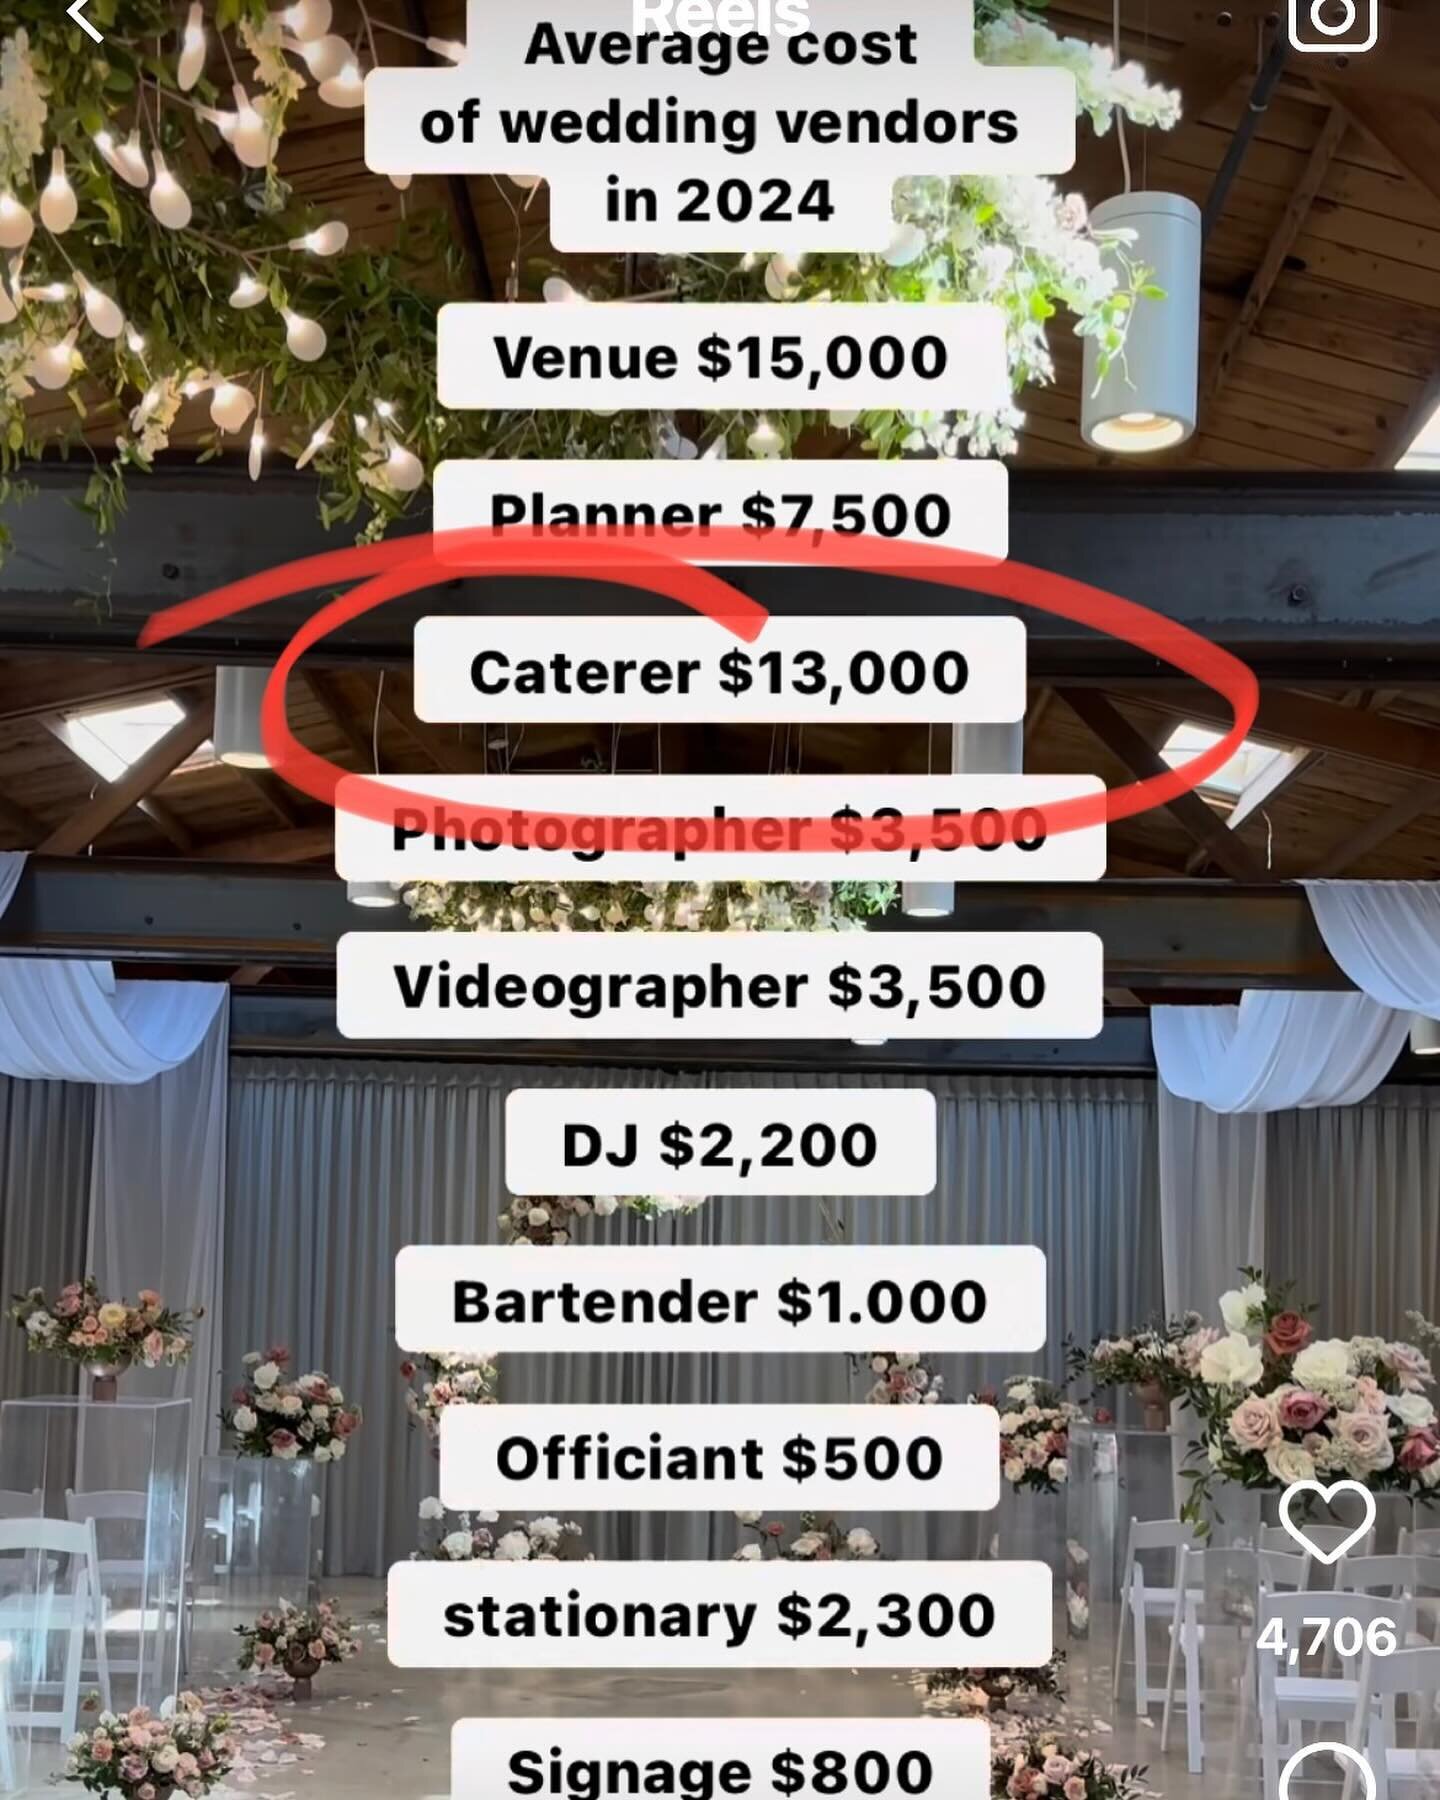 $13k for a caterer? Who would be willing to invest so much for catering services? Call us if so 😅